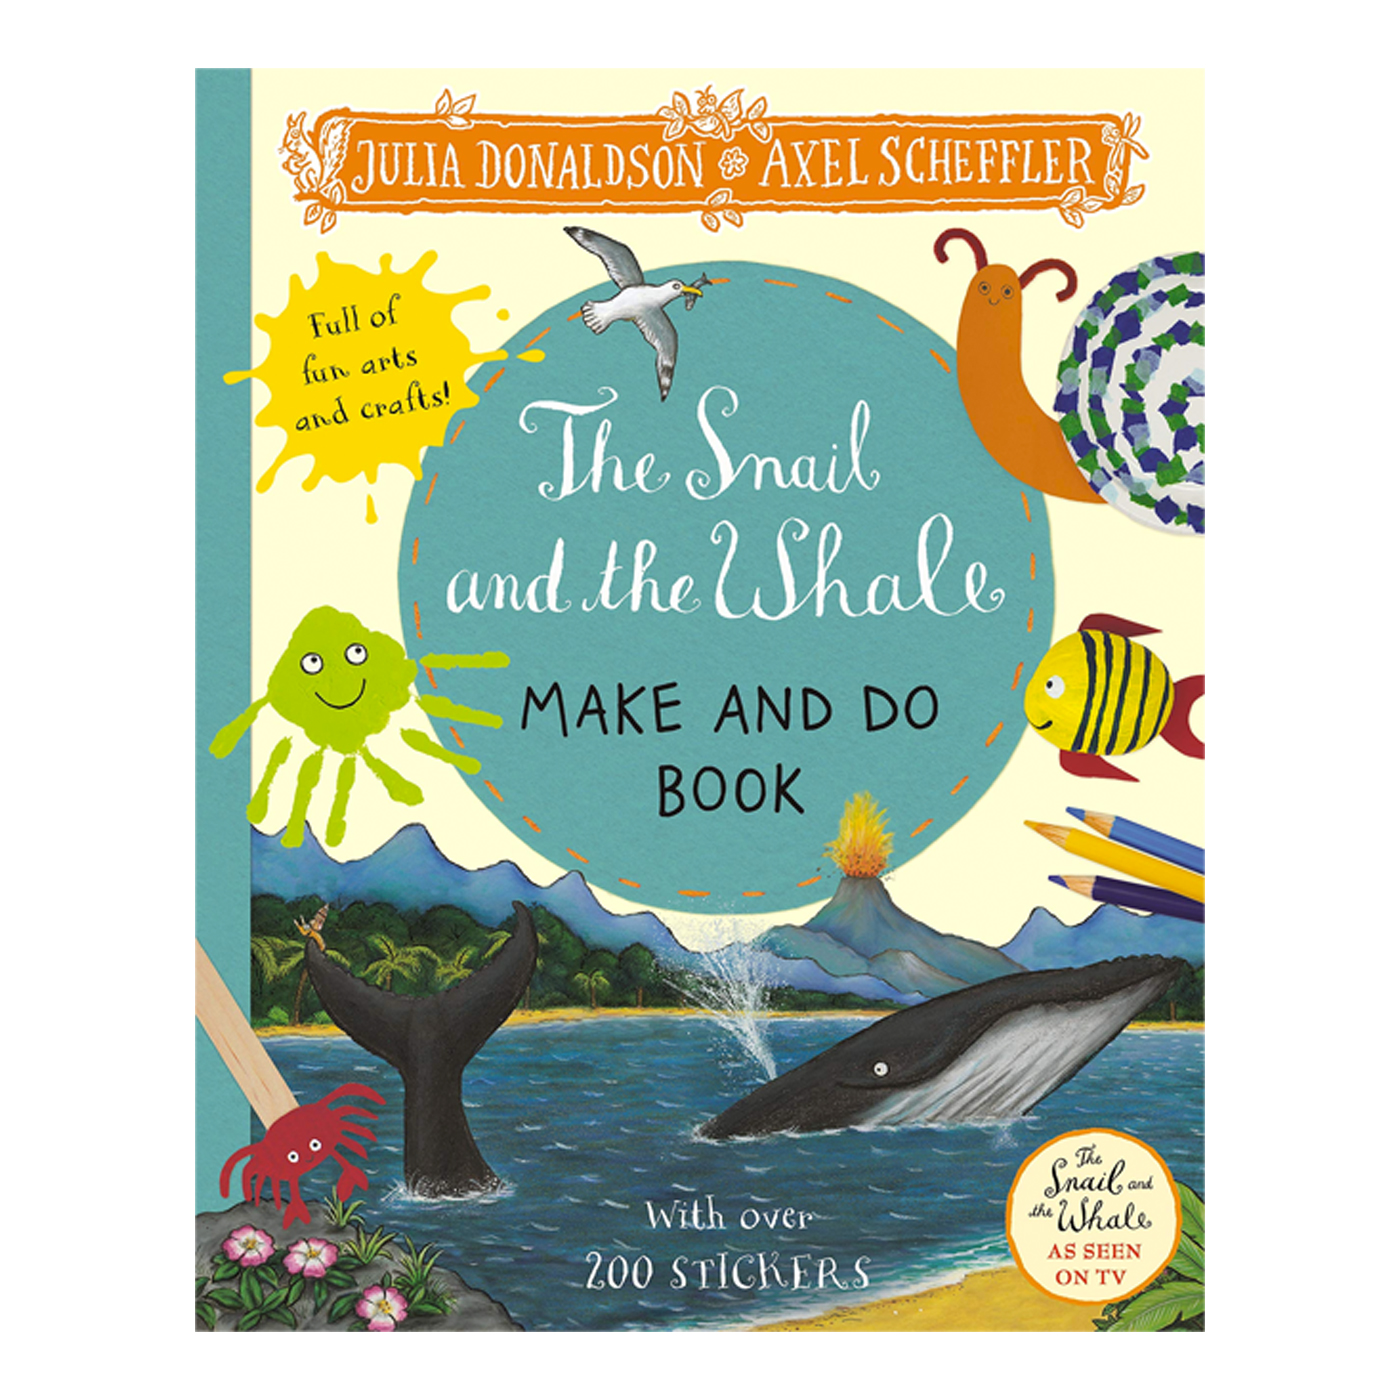  The Snail and the Whale Make and Do Book